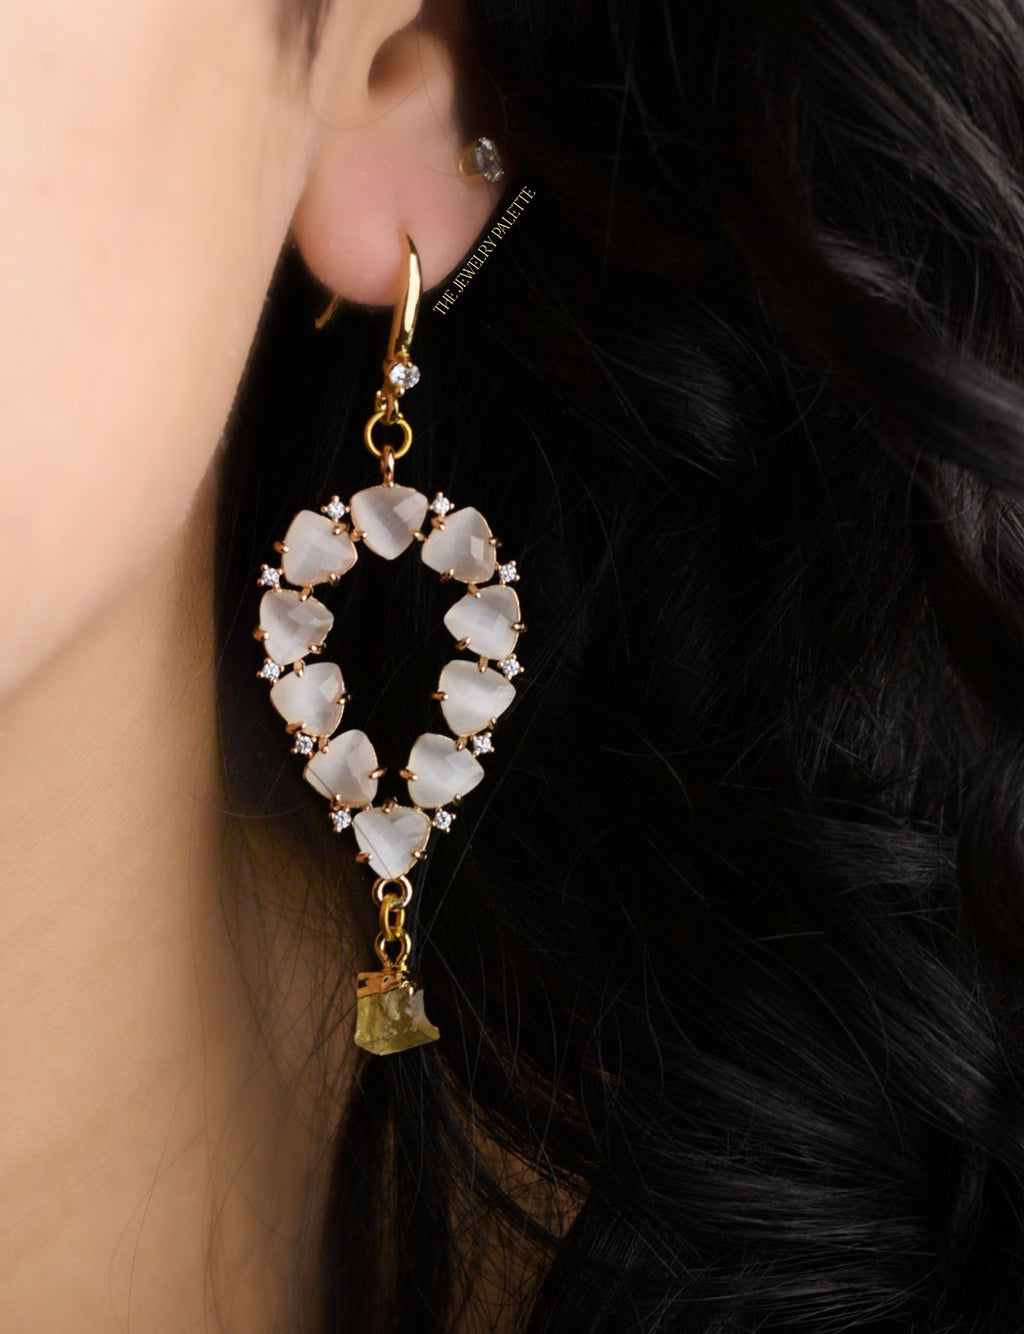 Yara white stones with gold edged amethyst drop earrings